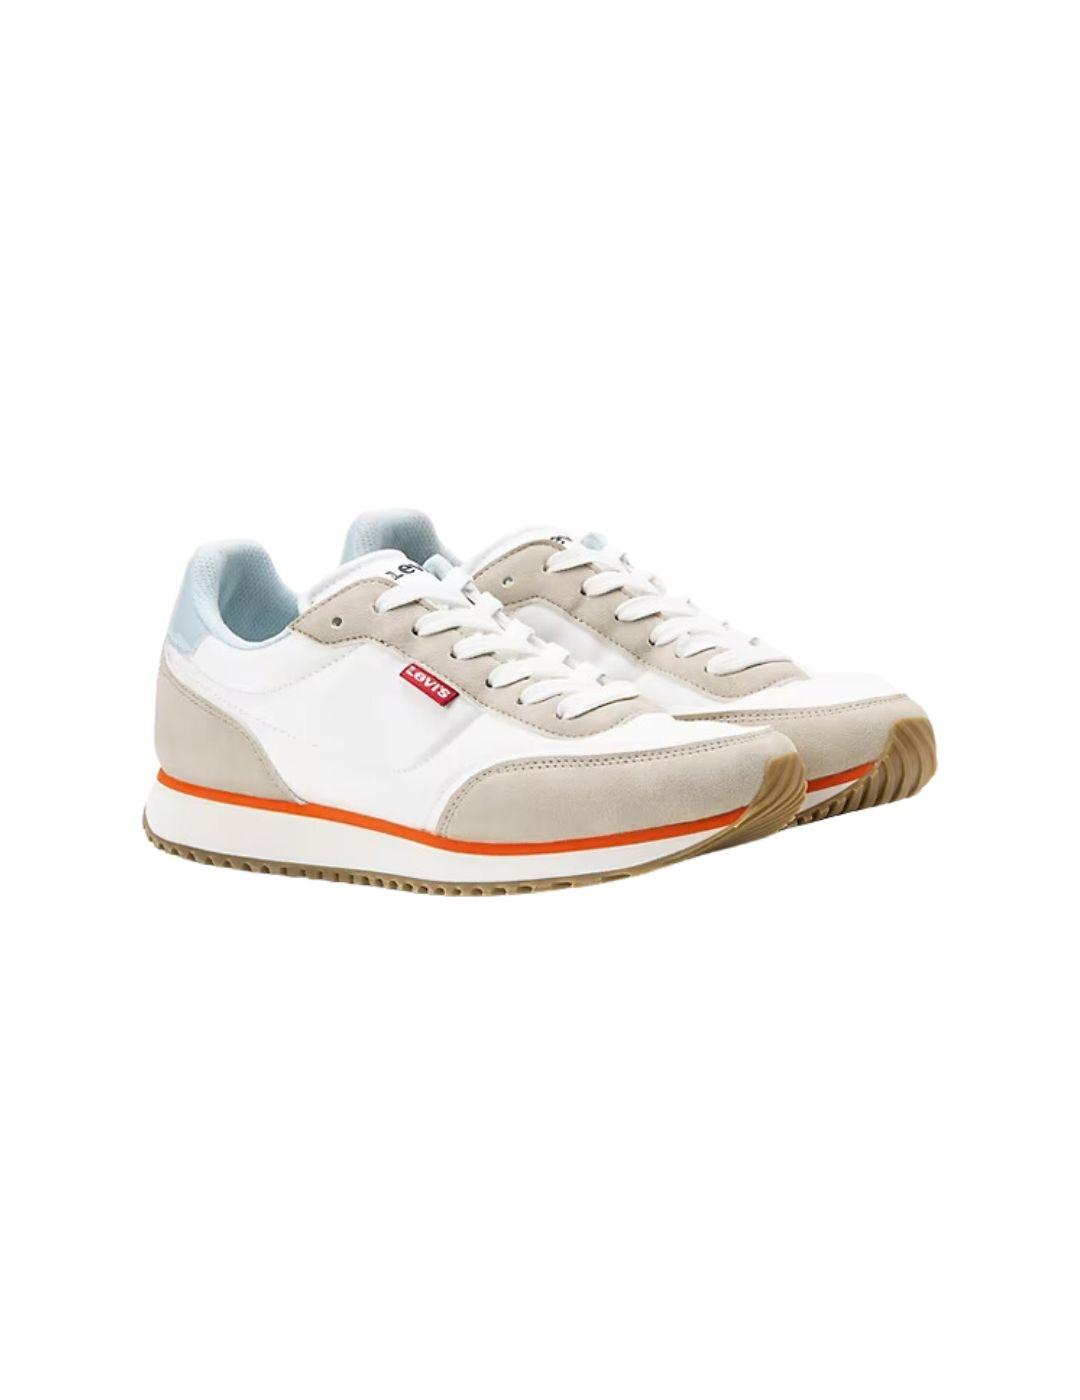 Zapatillas Levi's® Stag Runner para mujer